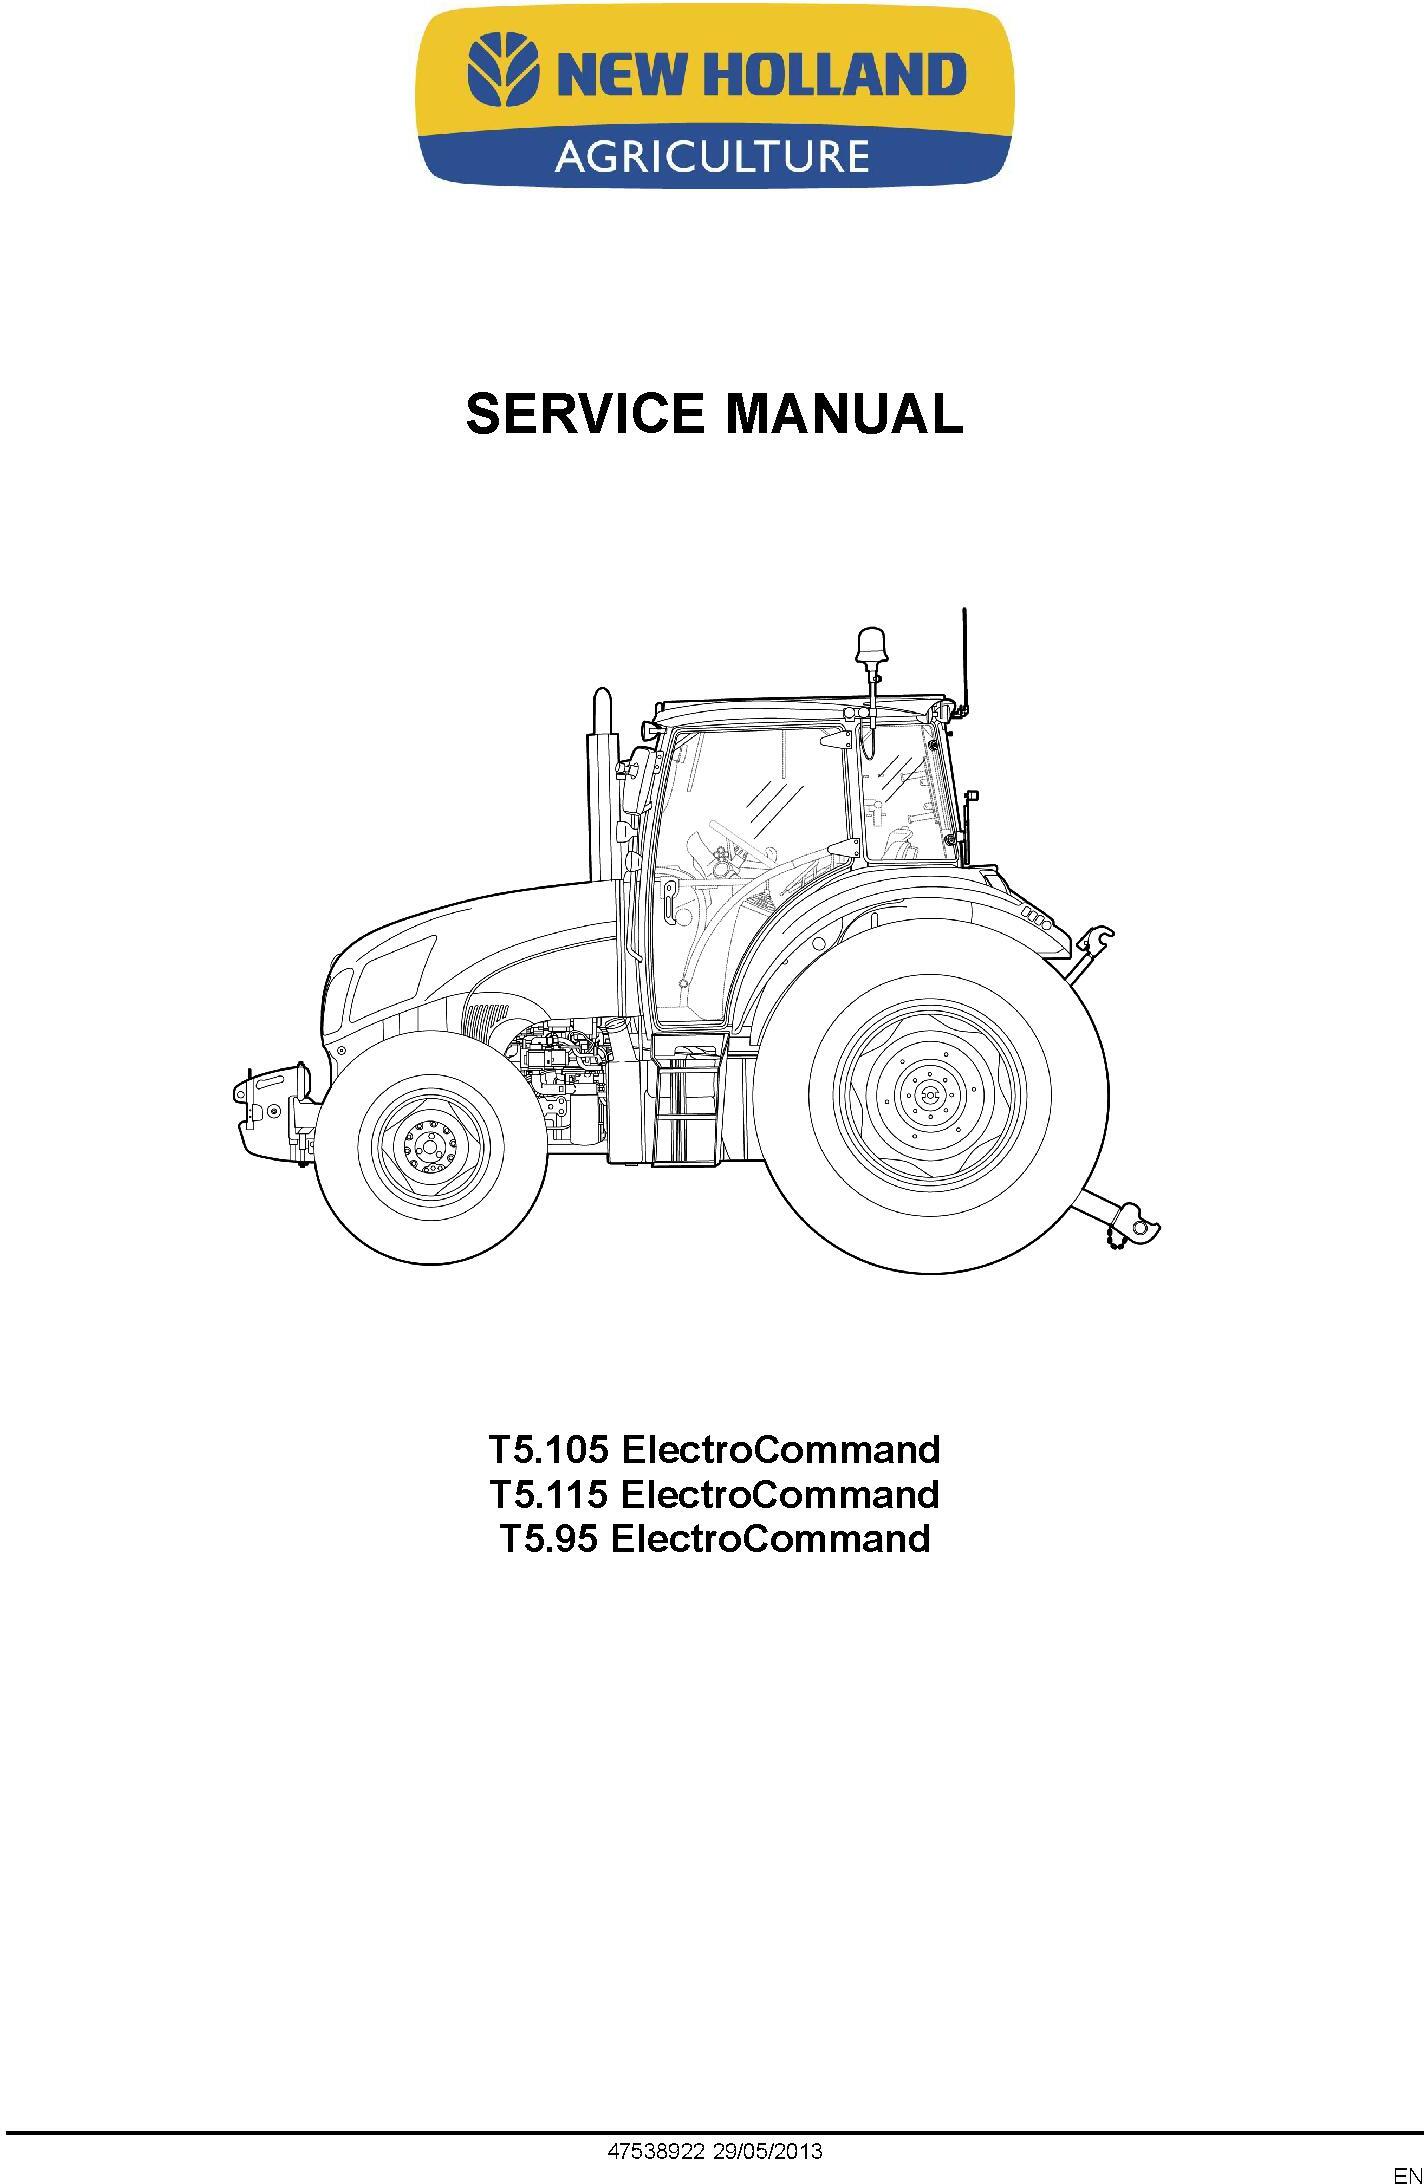 New Holland T5.95, T5.105, T5.115 Electro Command Tractor Service Manual - 1